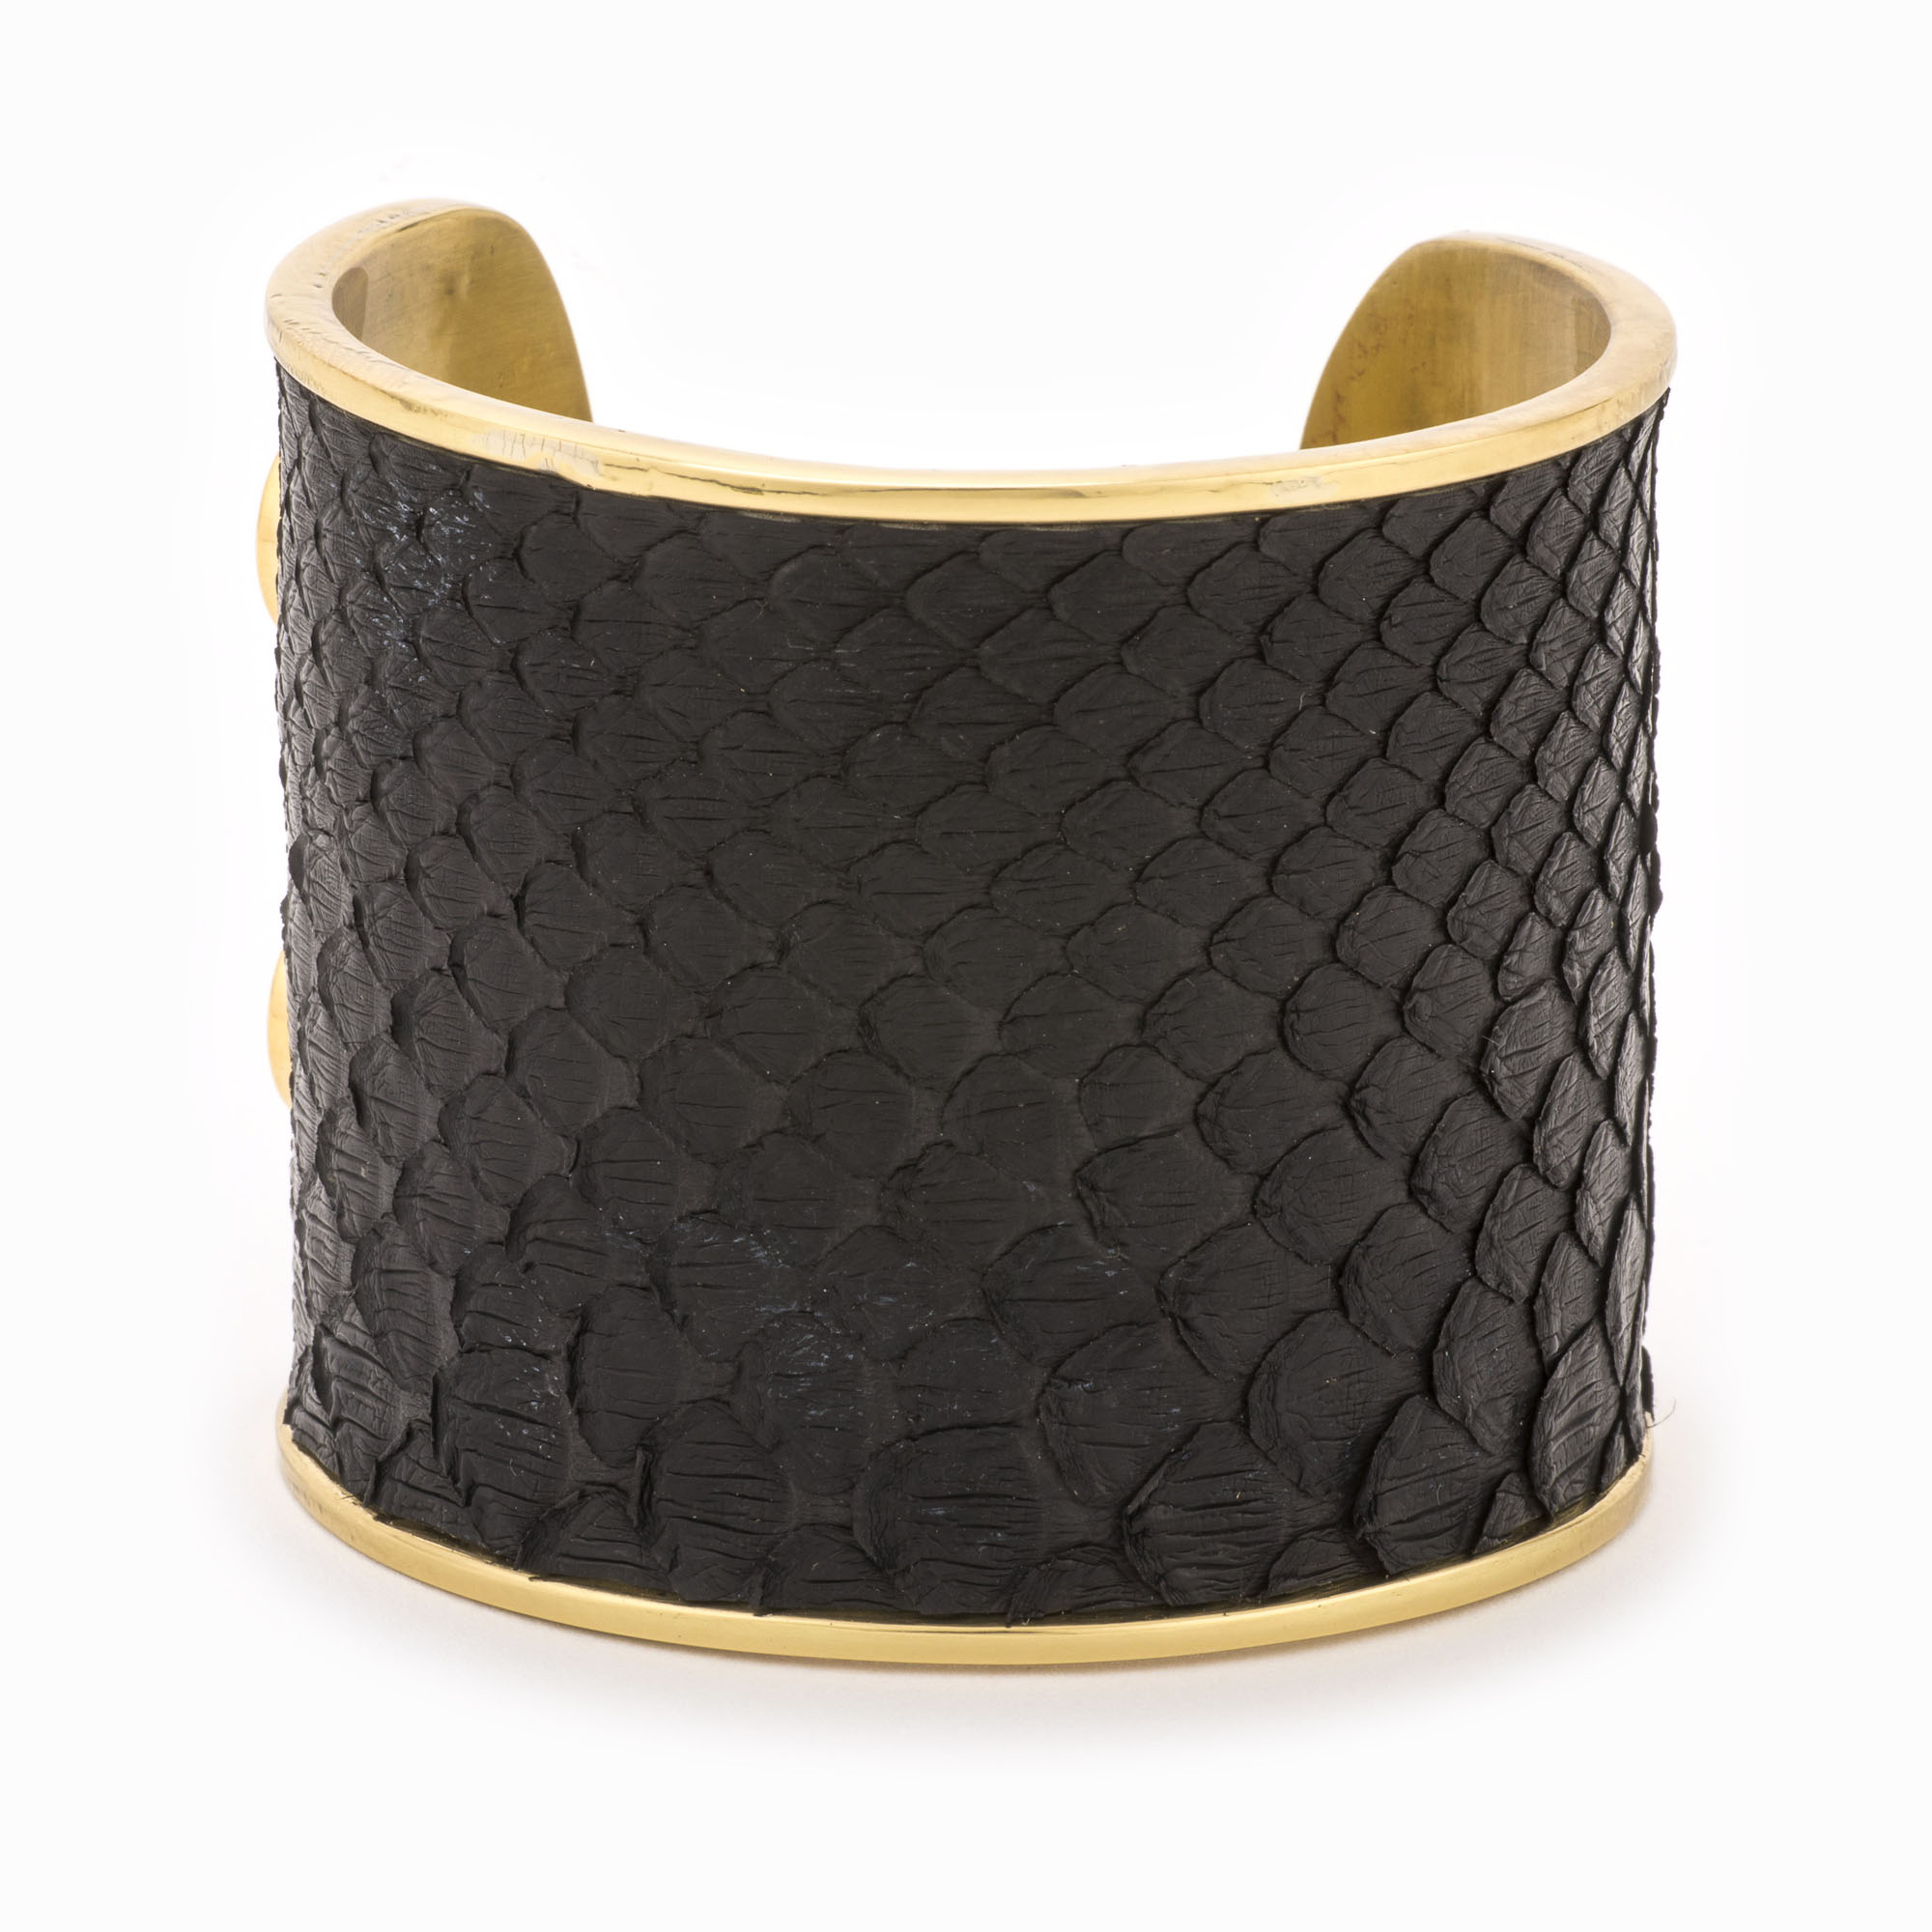 Featured image for “Large Black Gold Cuff”